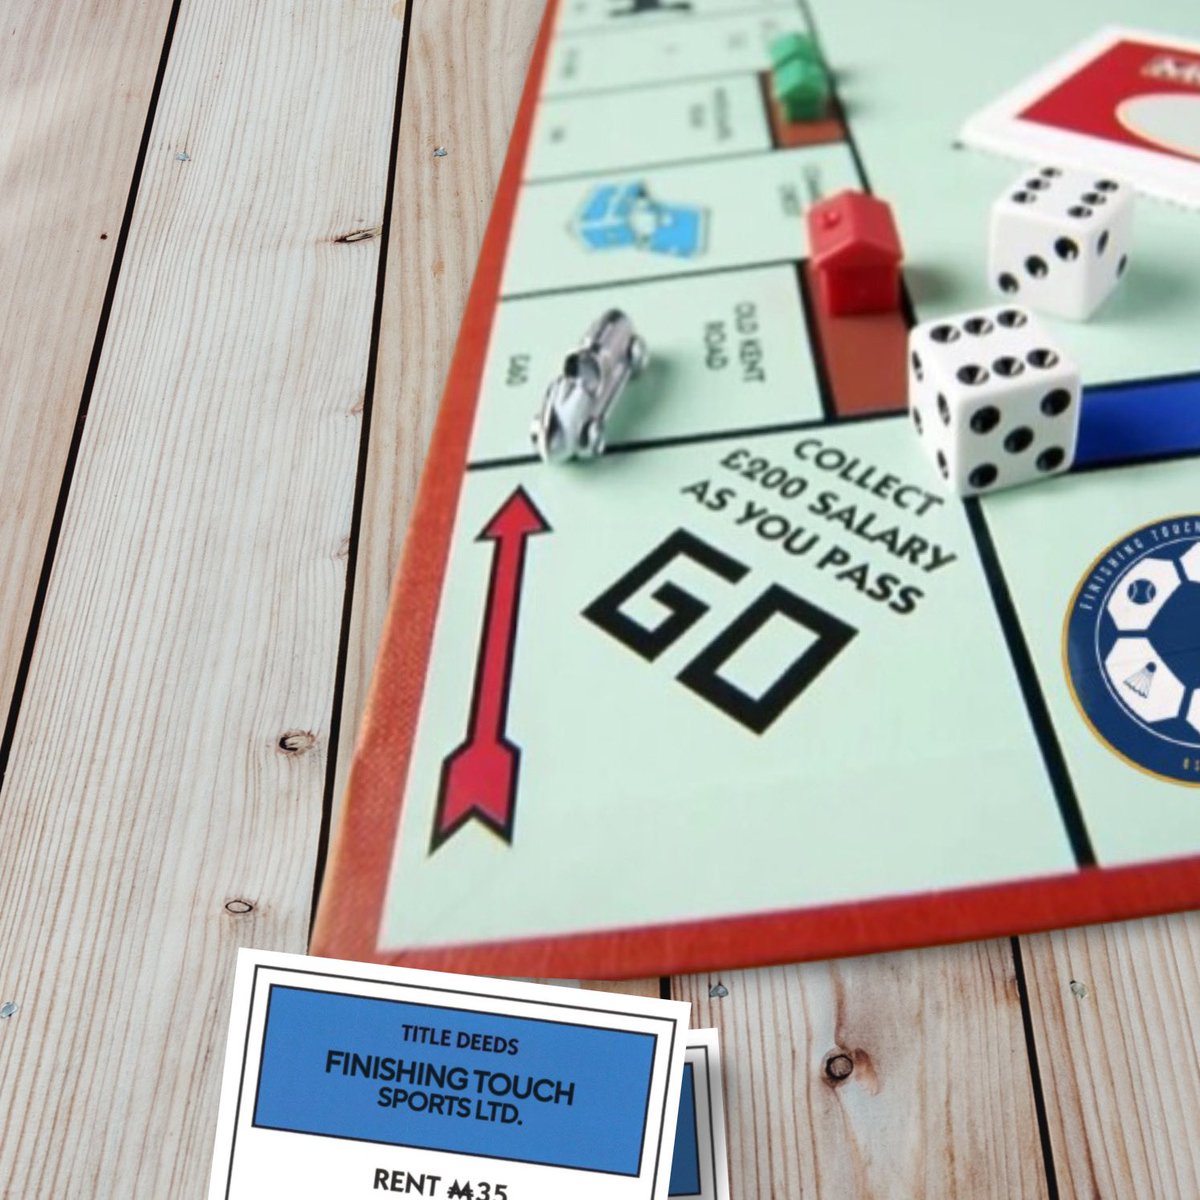 💛💙 ST. ALBANS MONOPOLY! 
Mayfair replacement needed?…🧐👀

#monopoly 
#stalbans
#stalbanslife 
#stalbansbusinesses